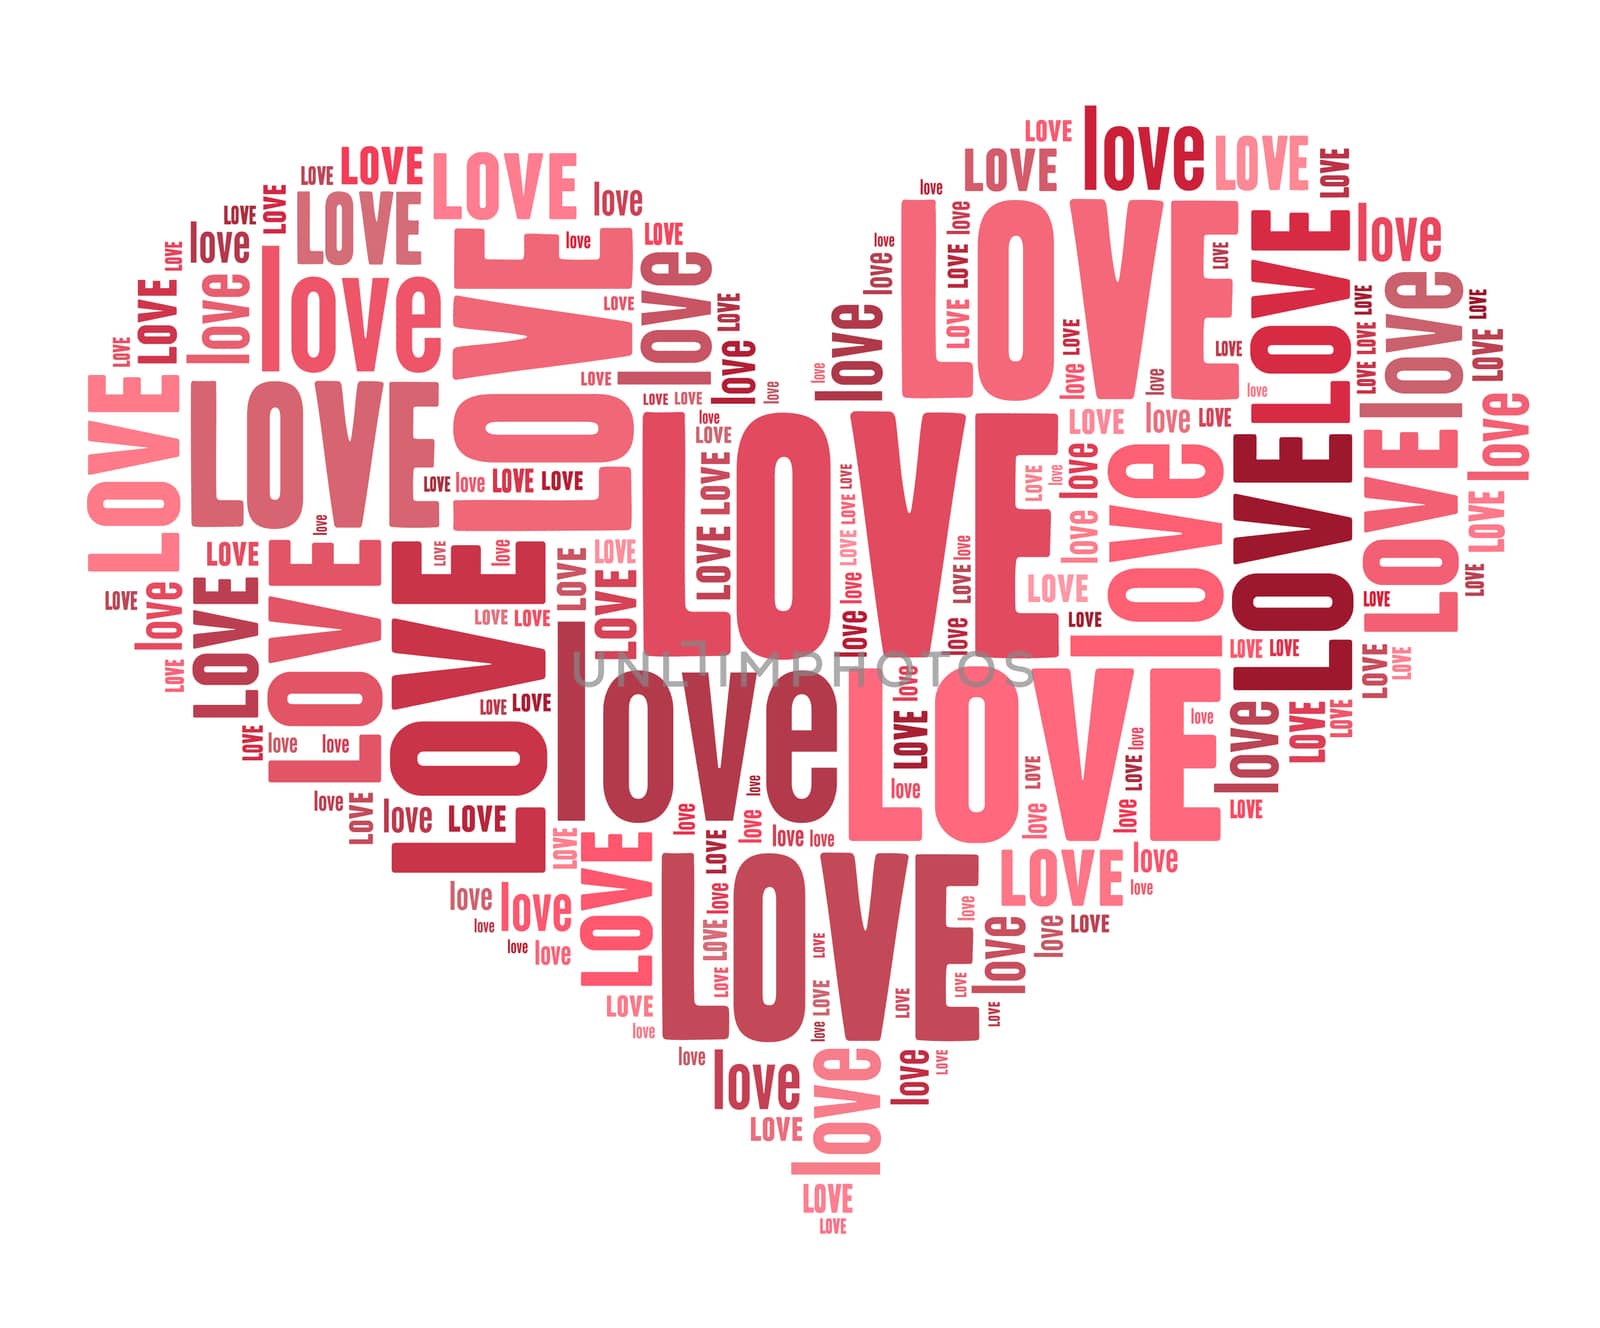 Valentines day card word cloud concept on white background